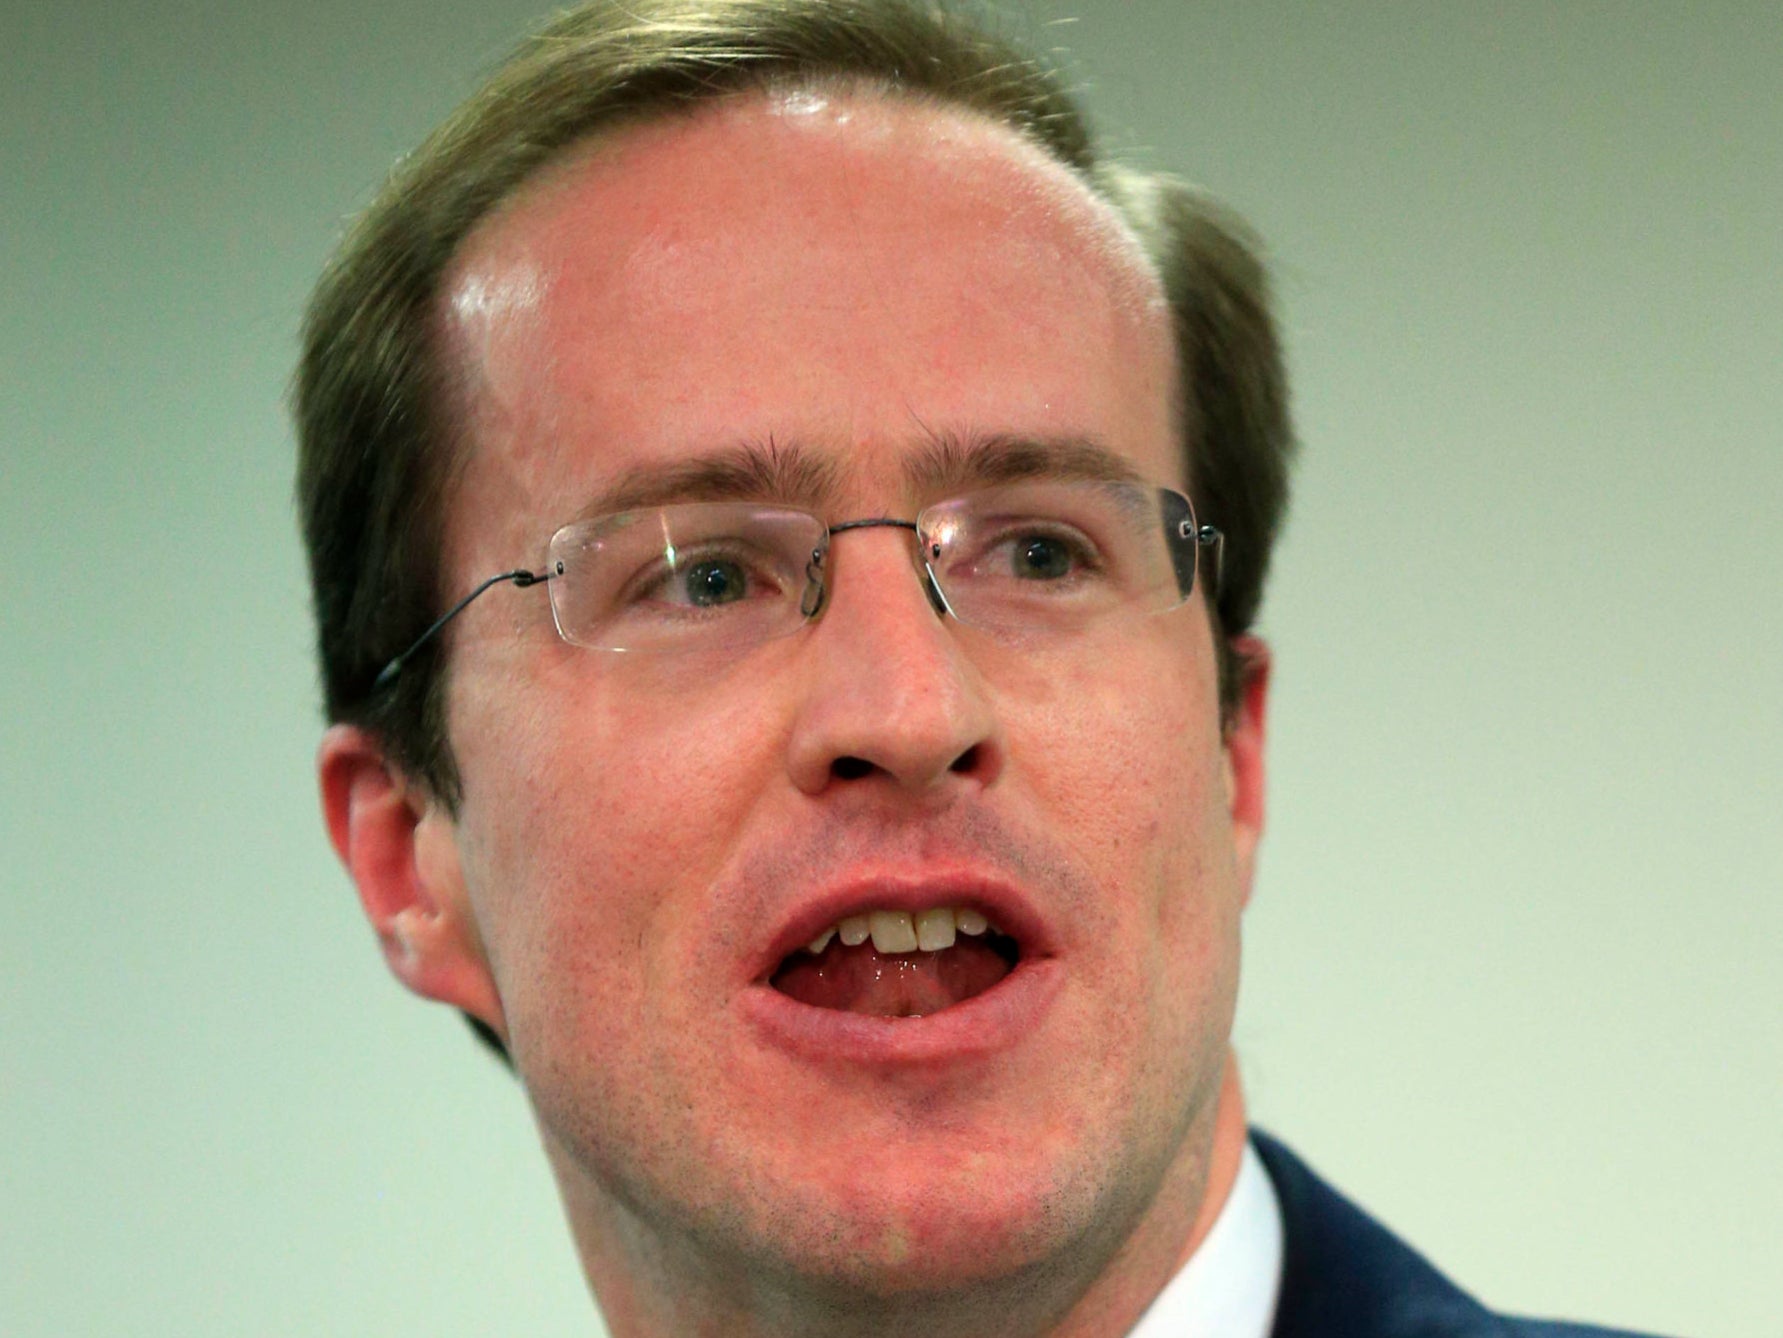 Former chief executive of the Vote Leave Brexit campaign Matthew Elliott